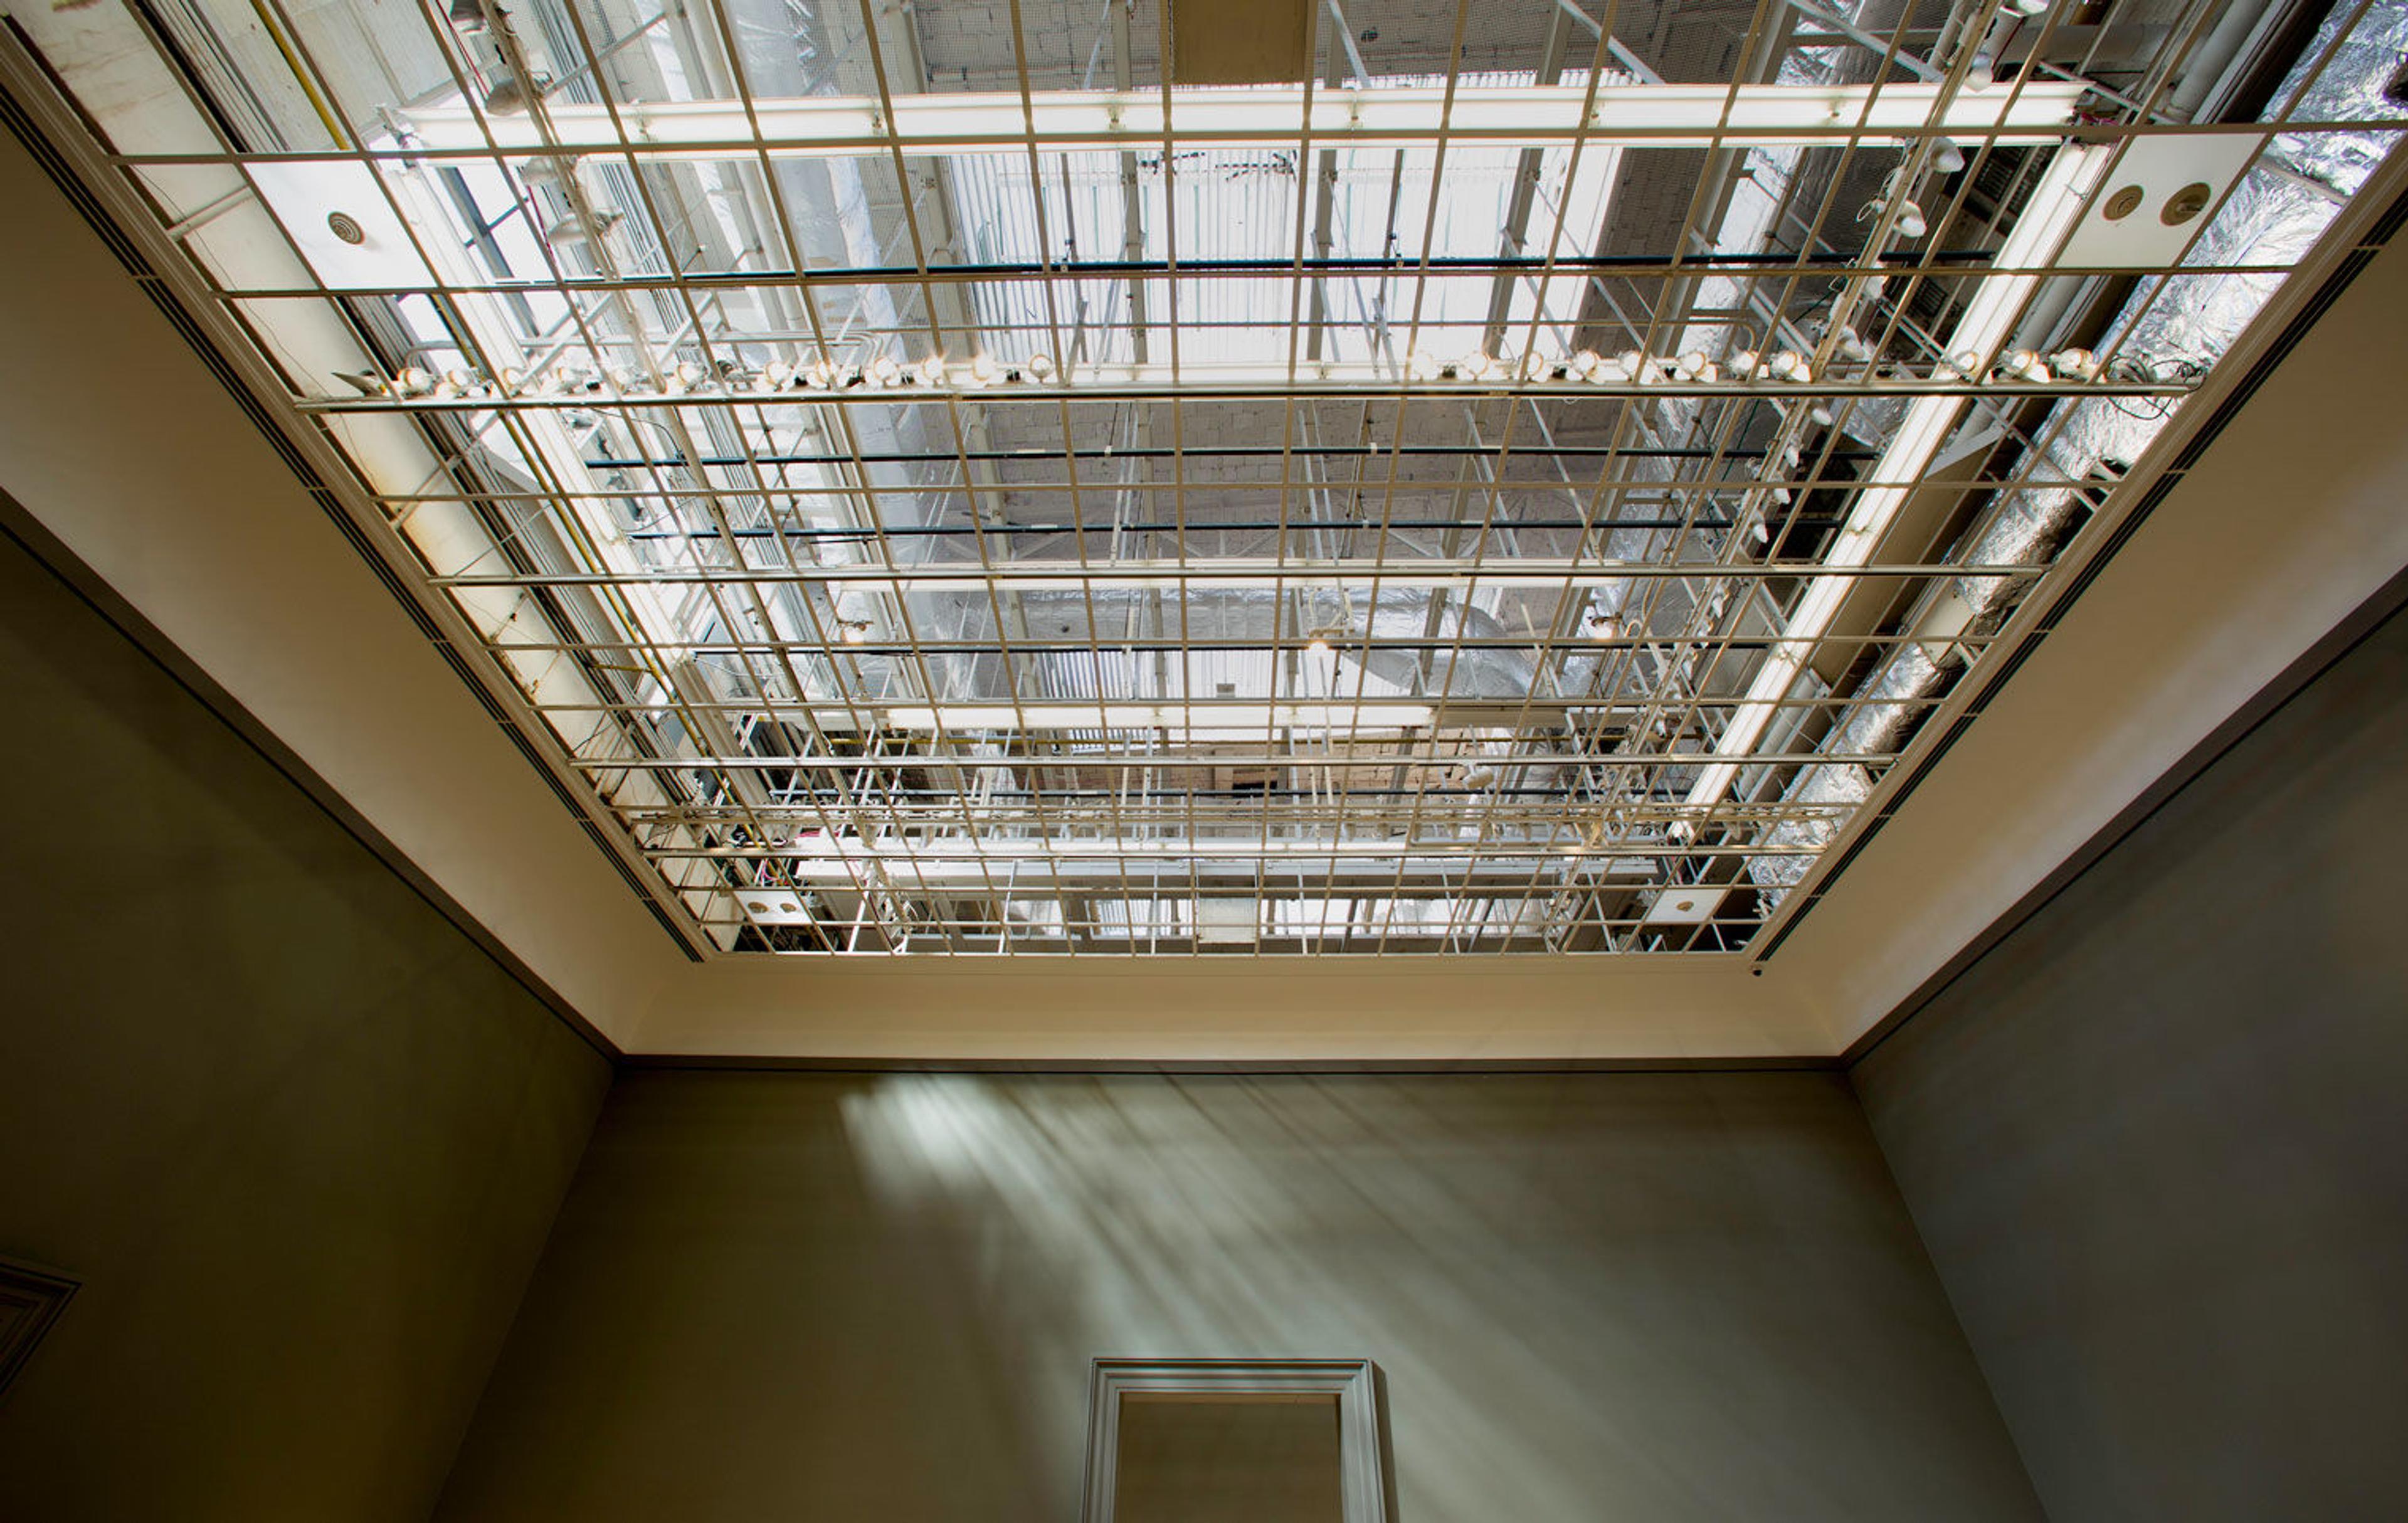 View of an empty gallery in The Met with exposed skylights in the ceiling